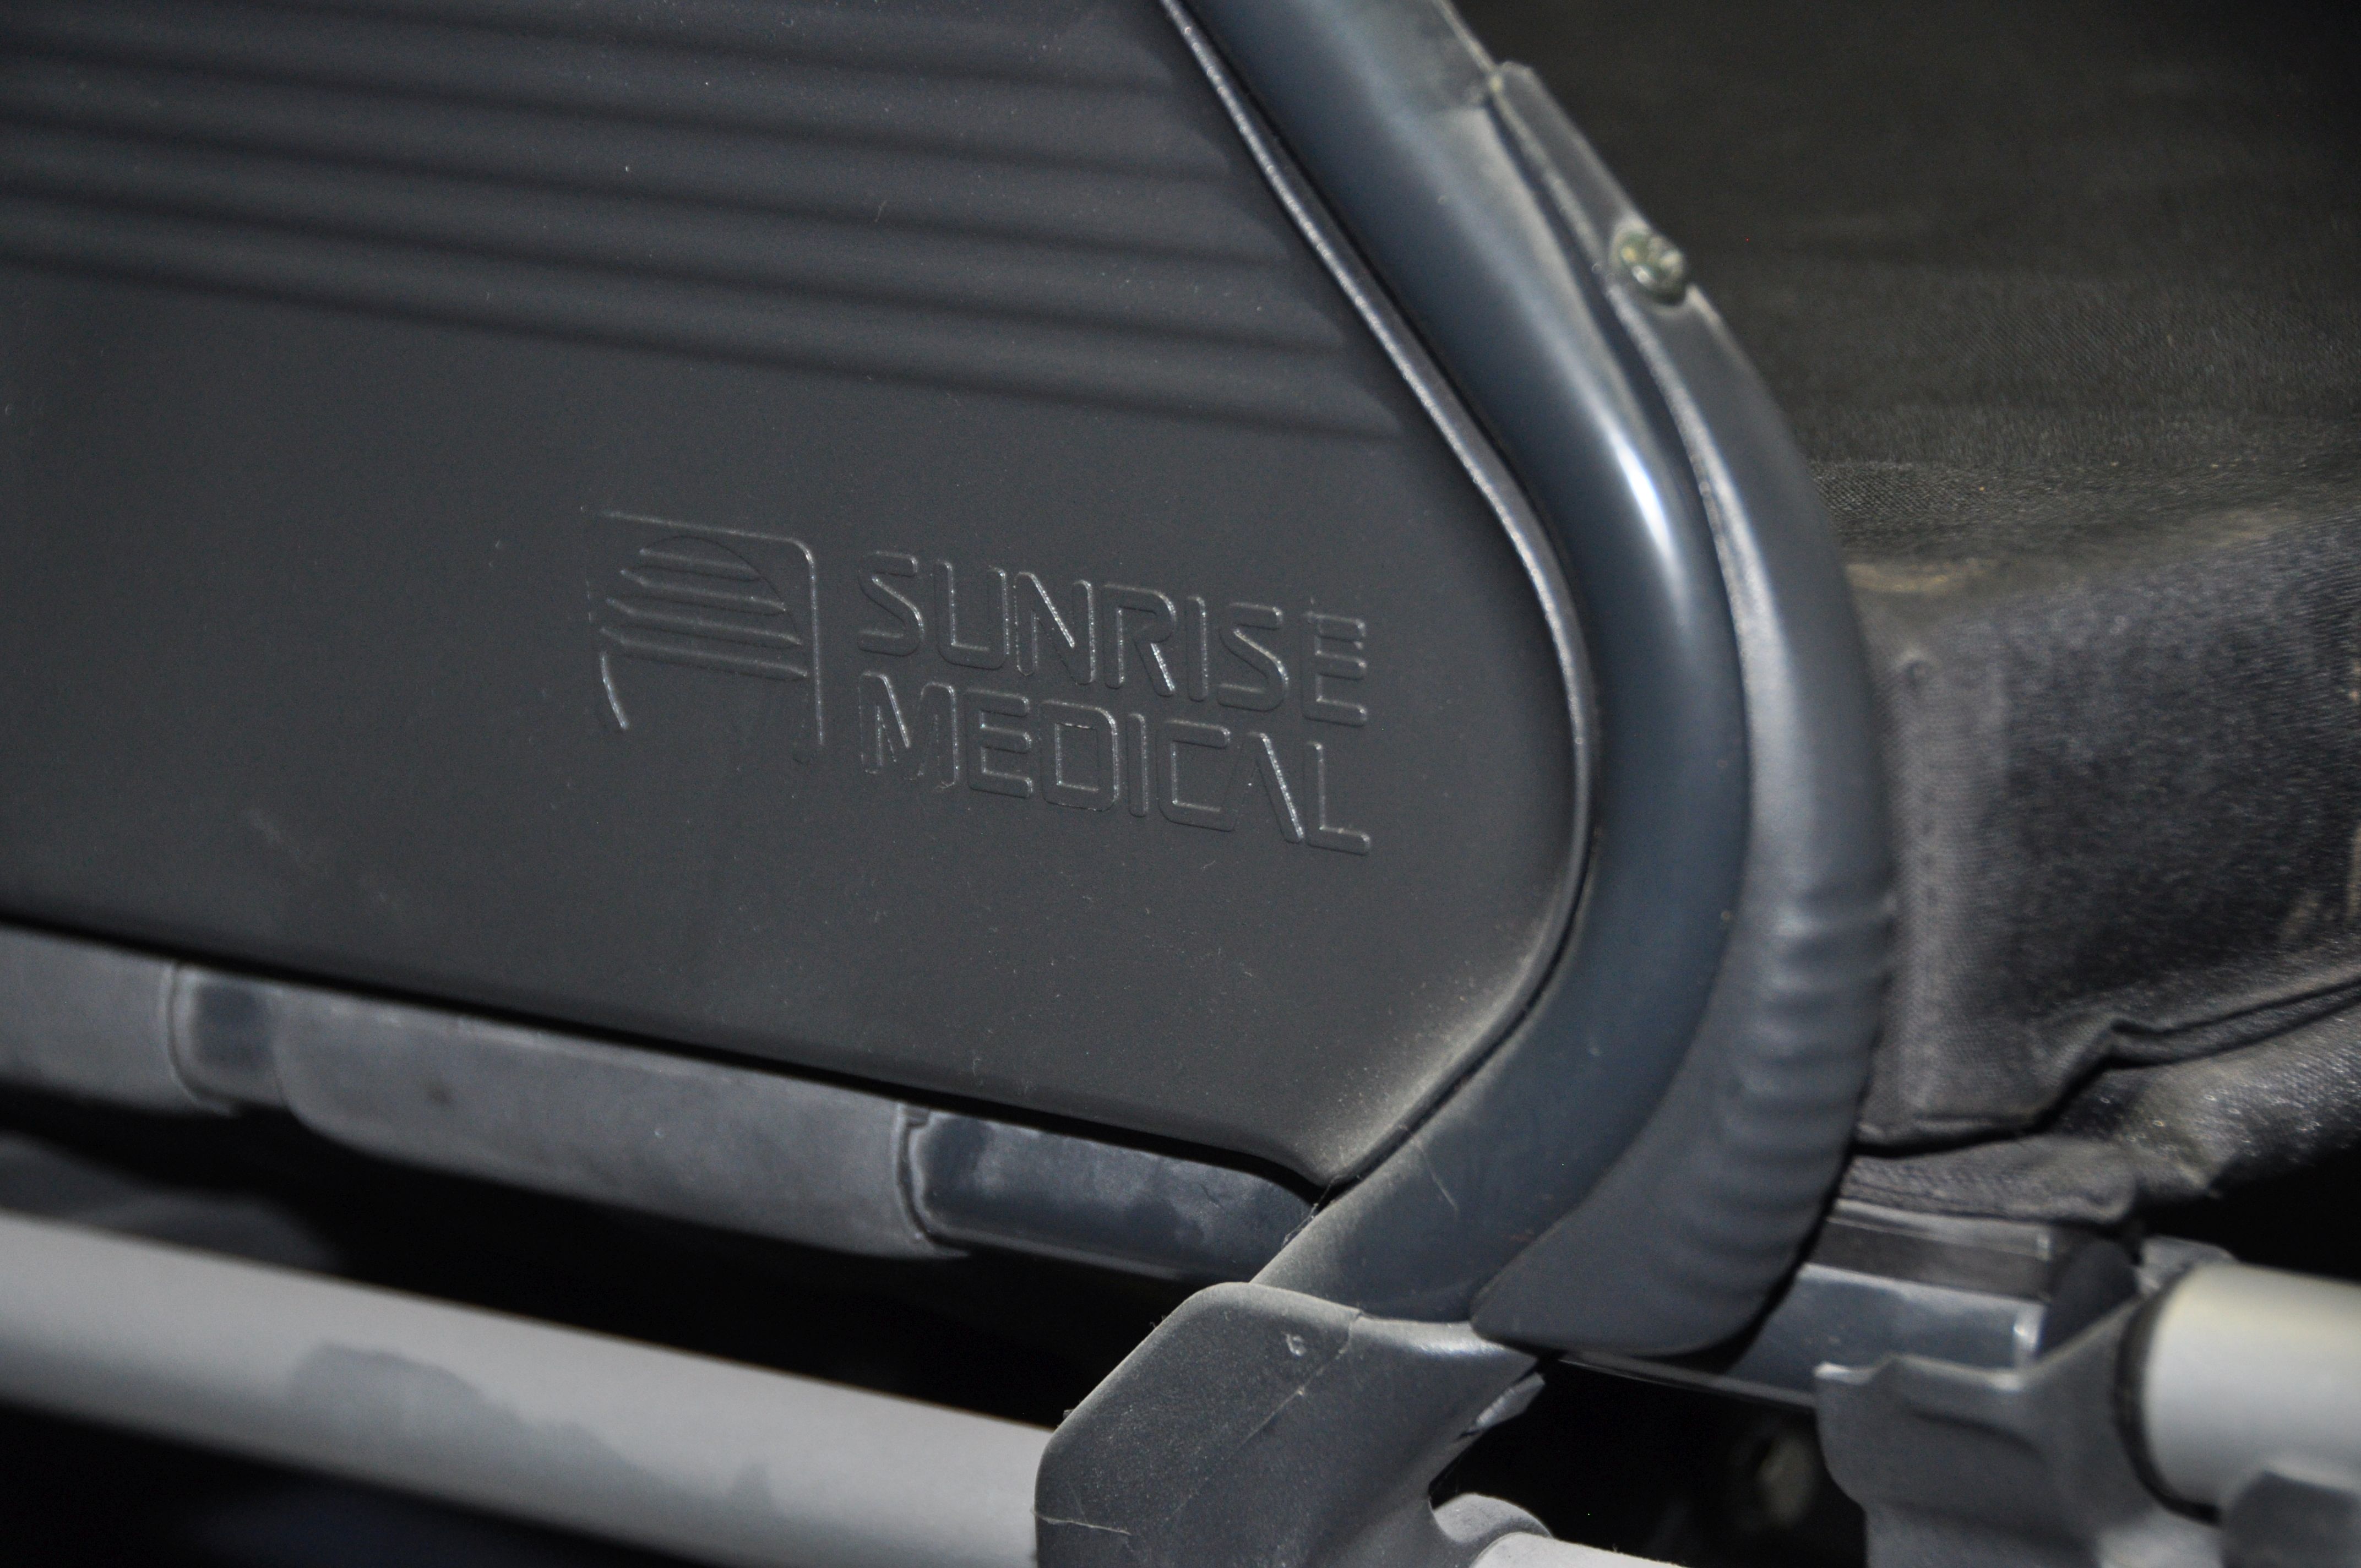 A SUNRISE MEDICAL FOLDING WHEELCHAIR, with additional cushion and footrests - Image 2 of 2